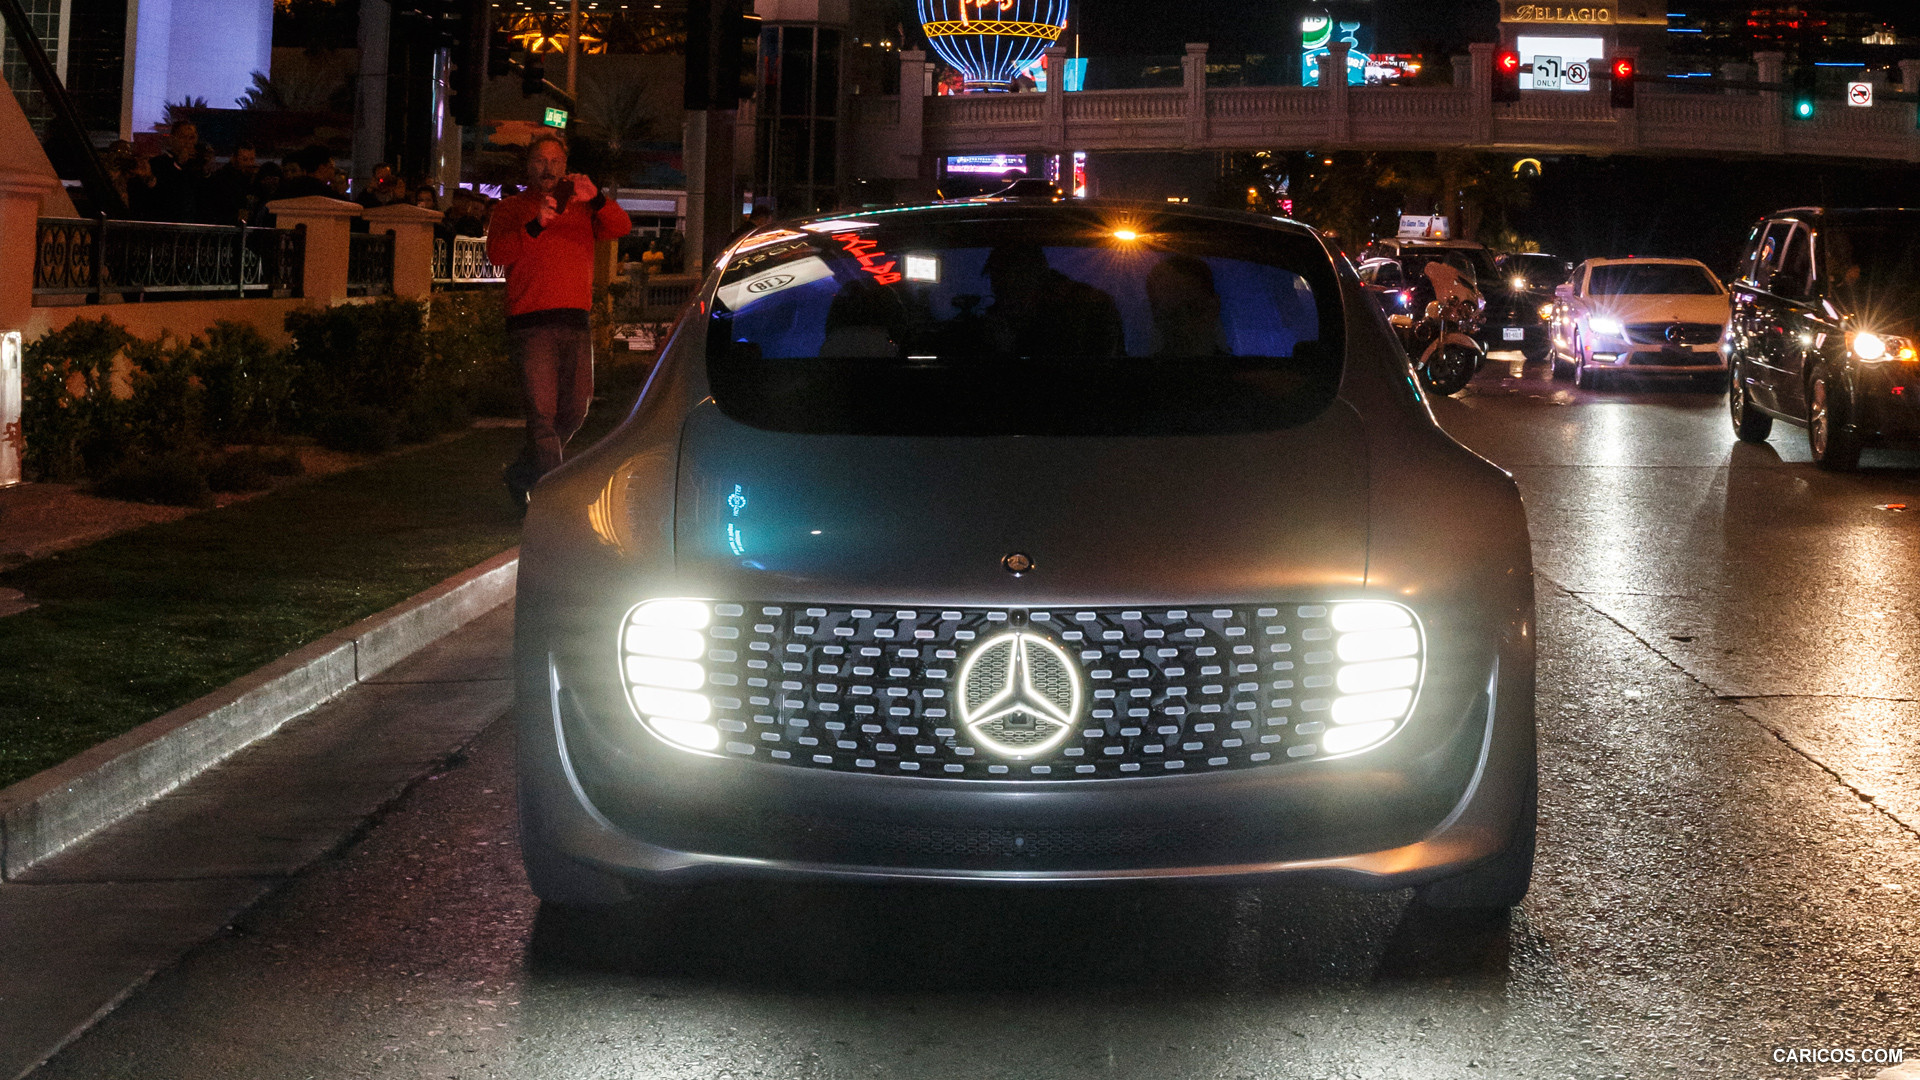 2015 Mercedes-Benz F 015 Luxury in Motion Concept  - Front, #38 of 92